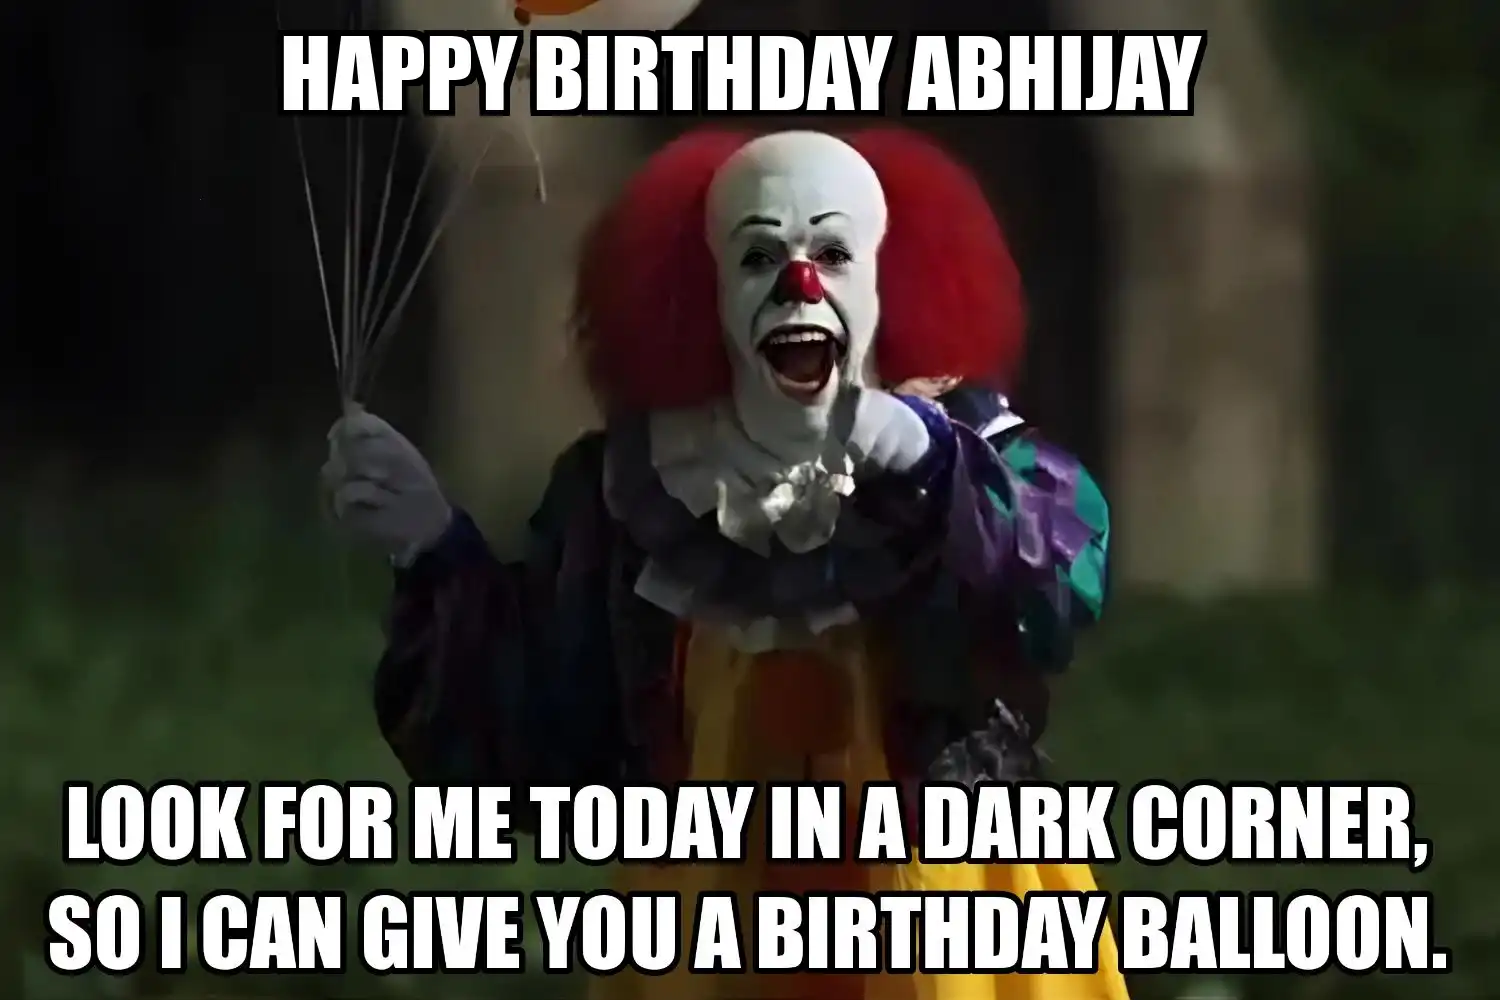 Happy Birthday Abhijay I Can Give You A Balloon Meme